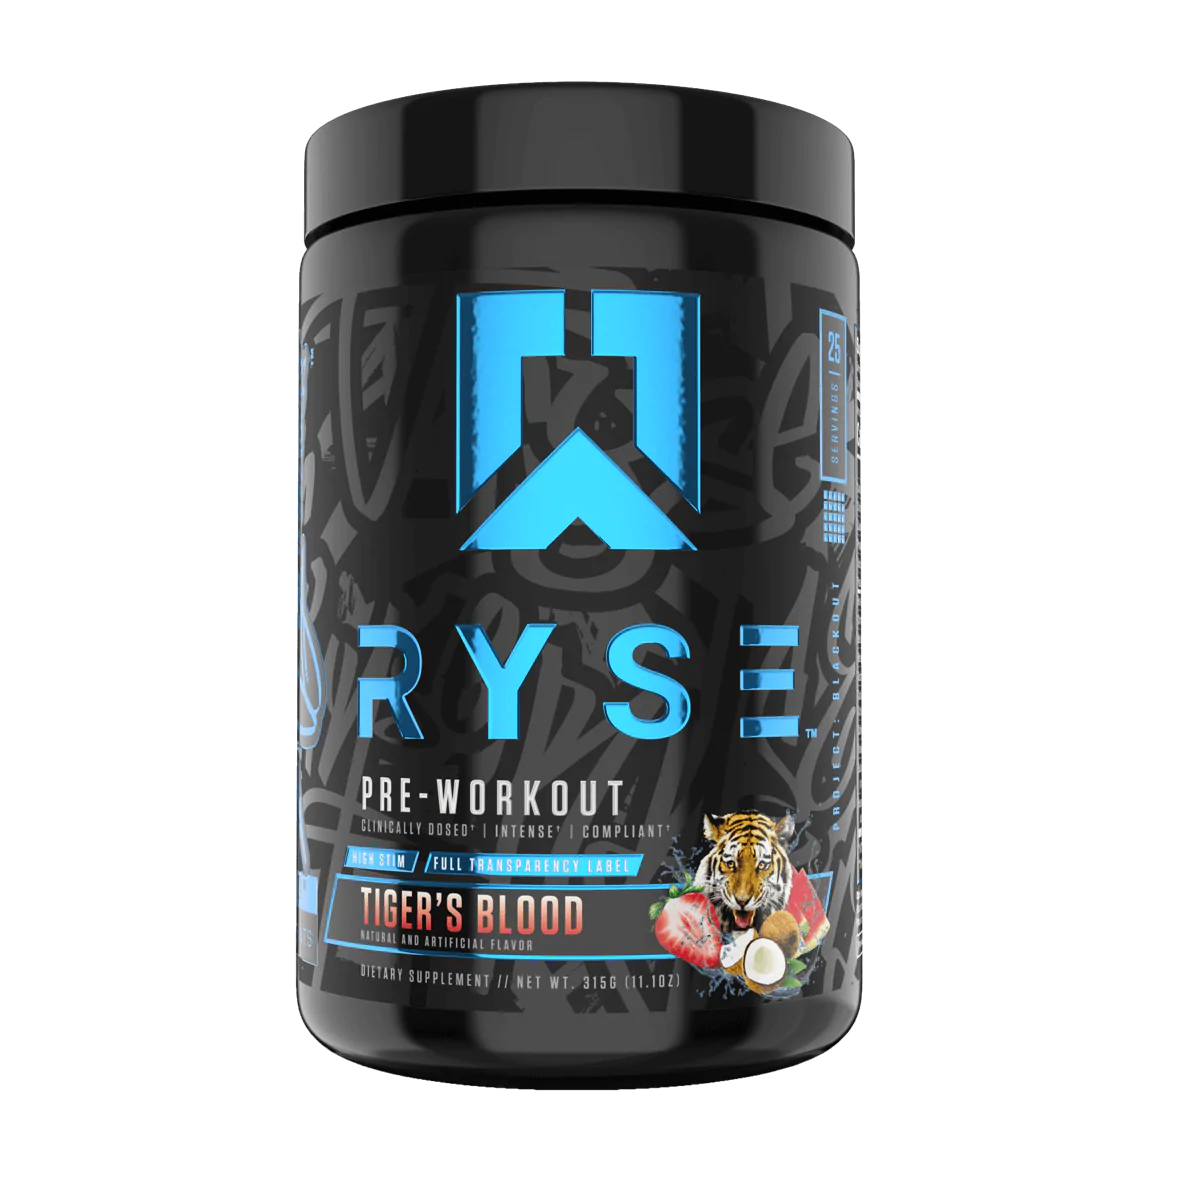 RYSE Project Blackout Pre-Workout - Tigers Blood